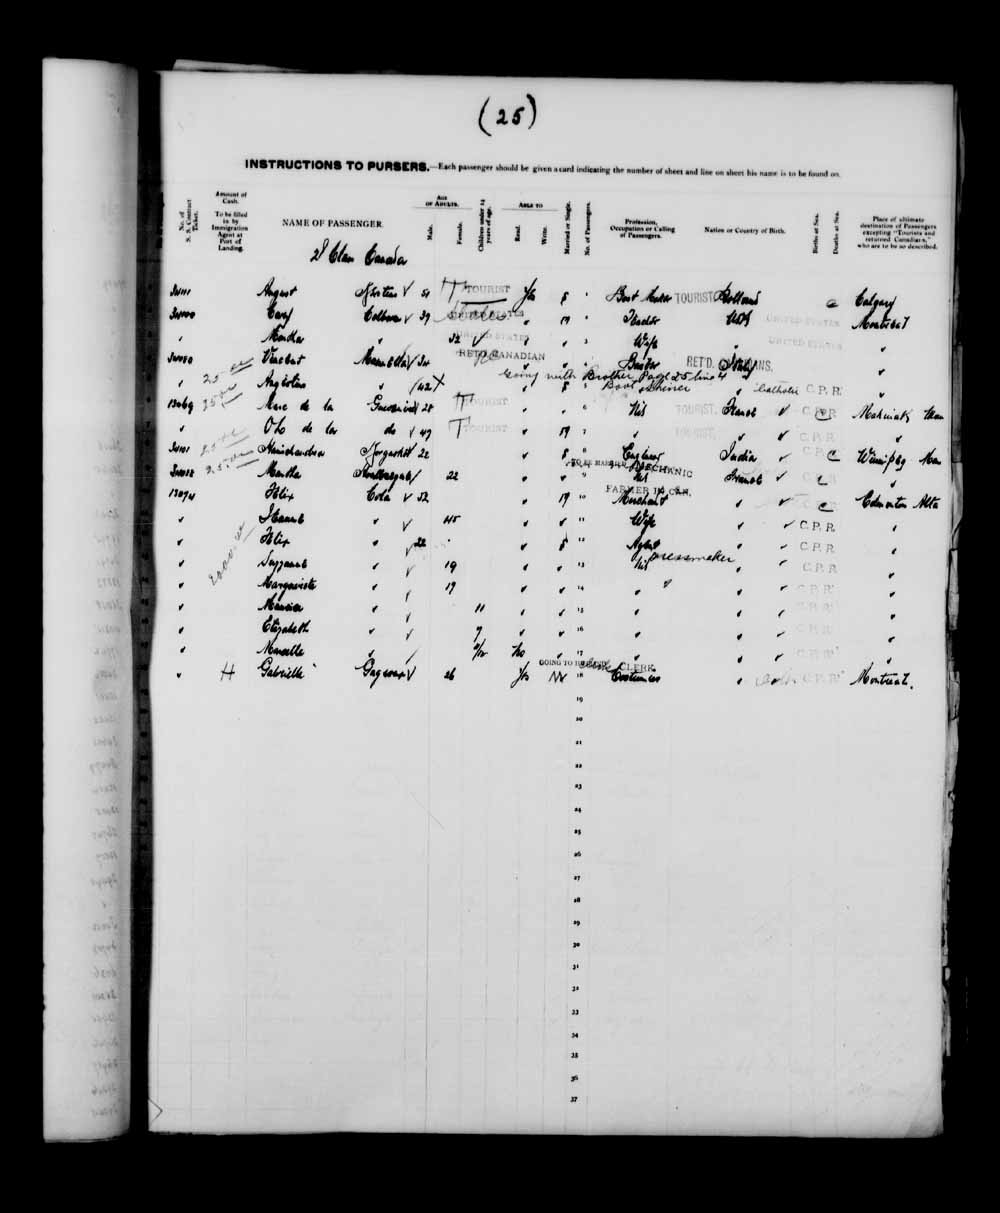 Digitized page of Quebec Passenger Lists for Image No.: e003591275